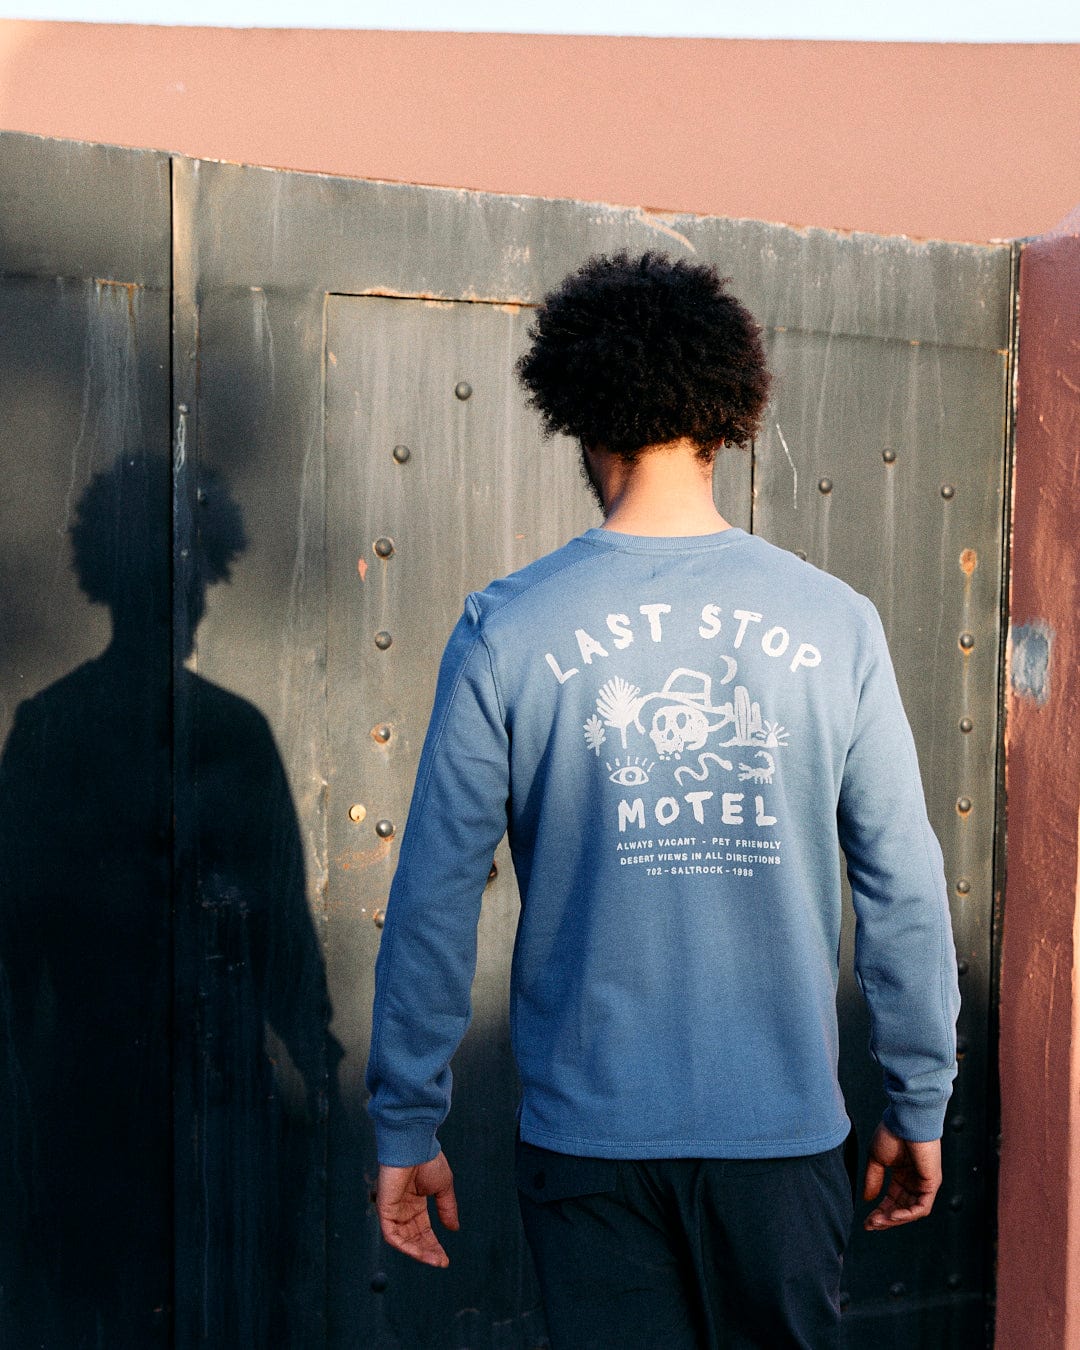 A person with an afro standing with their back to the camera, wearing a Saltrock blue sweatshirt with "Last Stop Motel" print and a crew neckline, in front of a metal door.